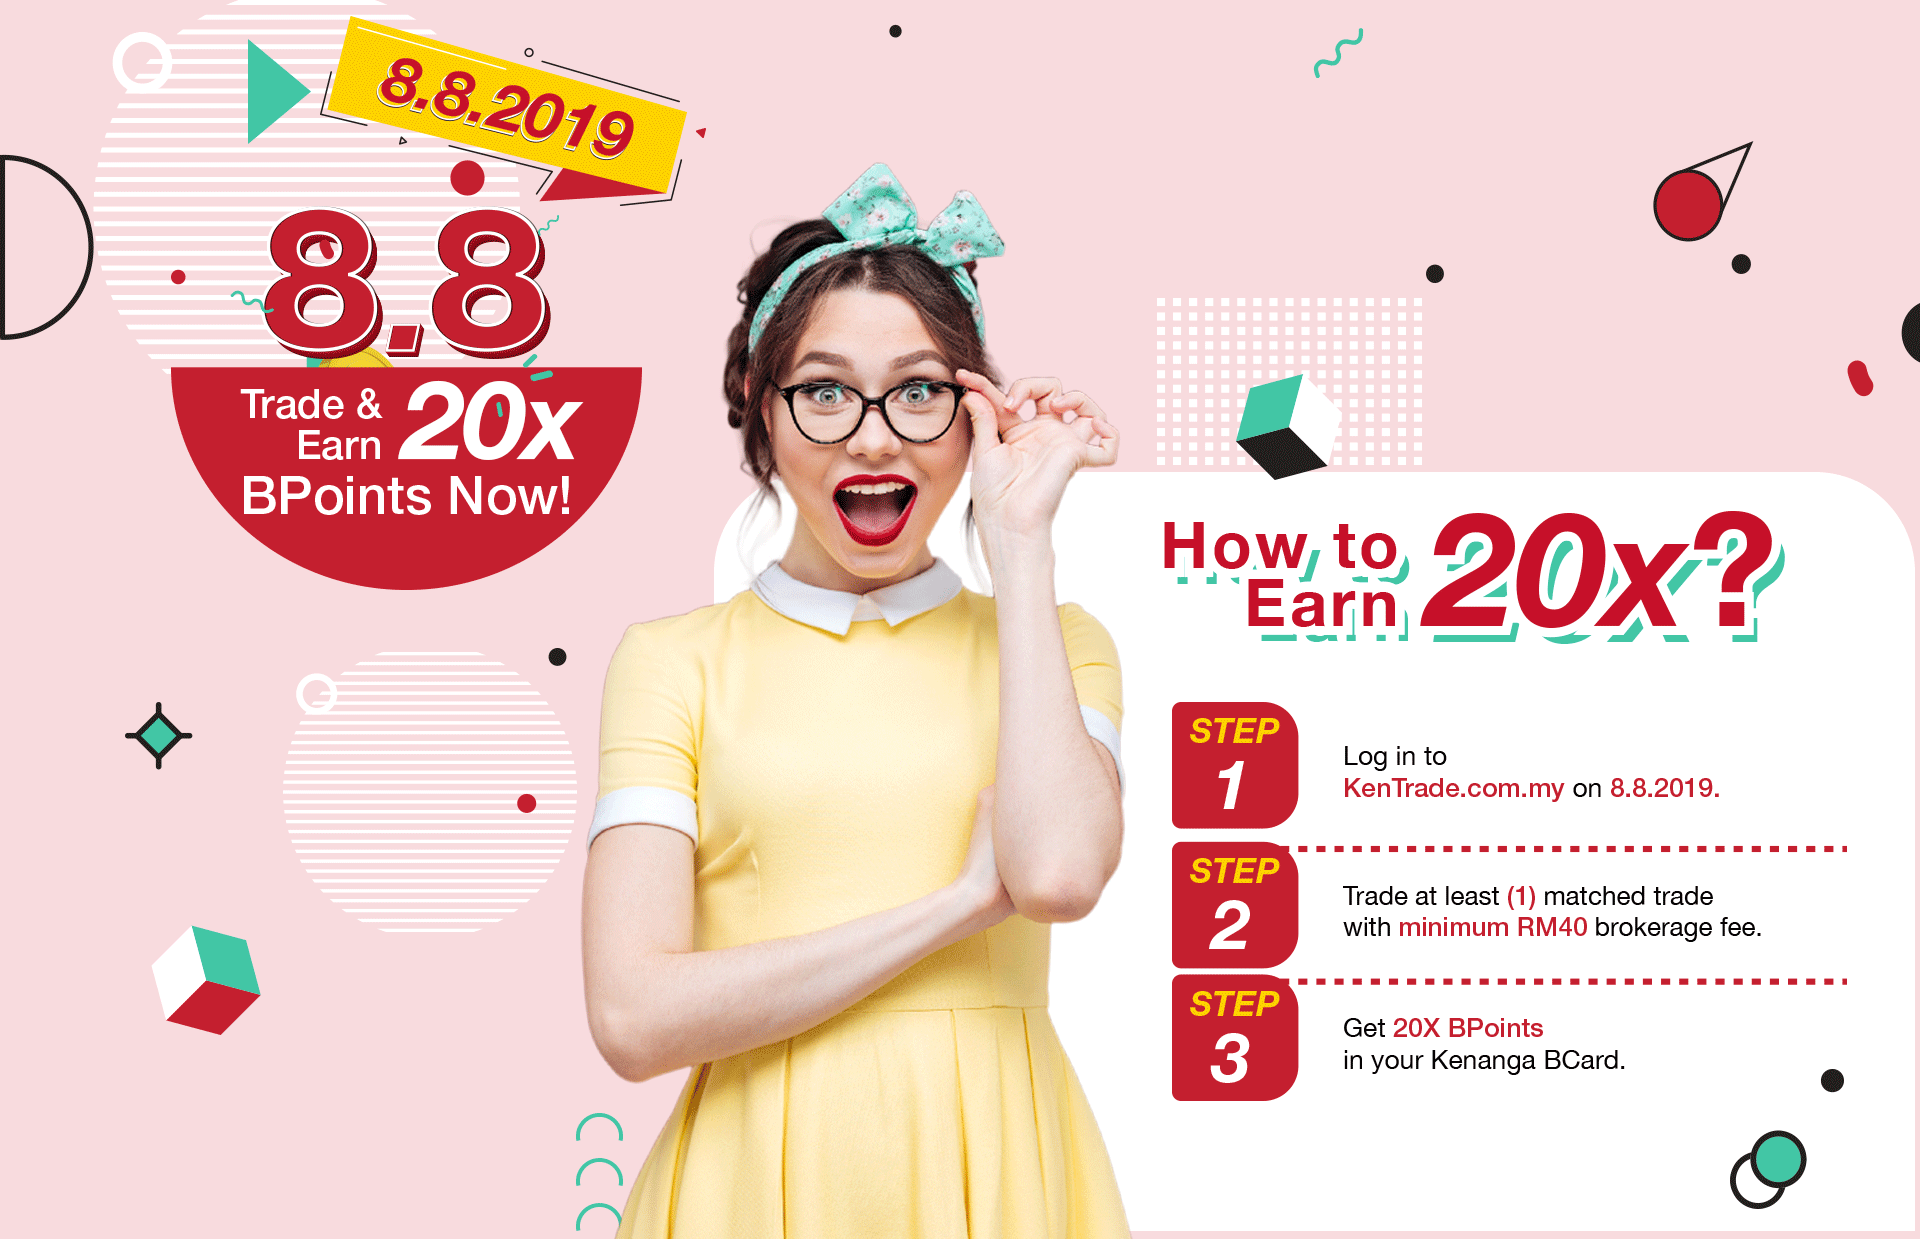 Trade & Earn 20x BPoints Now